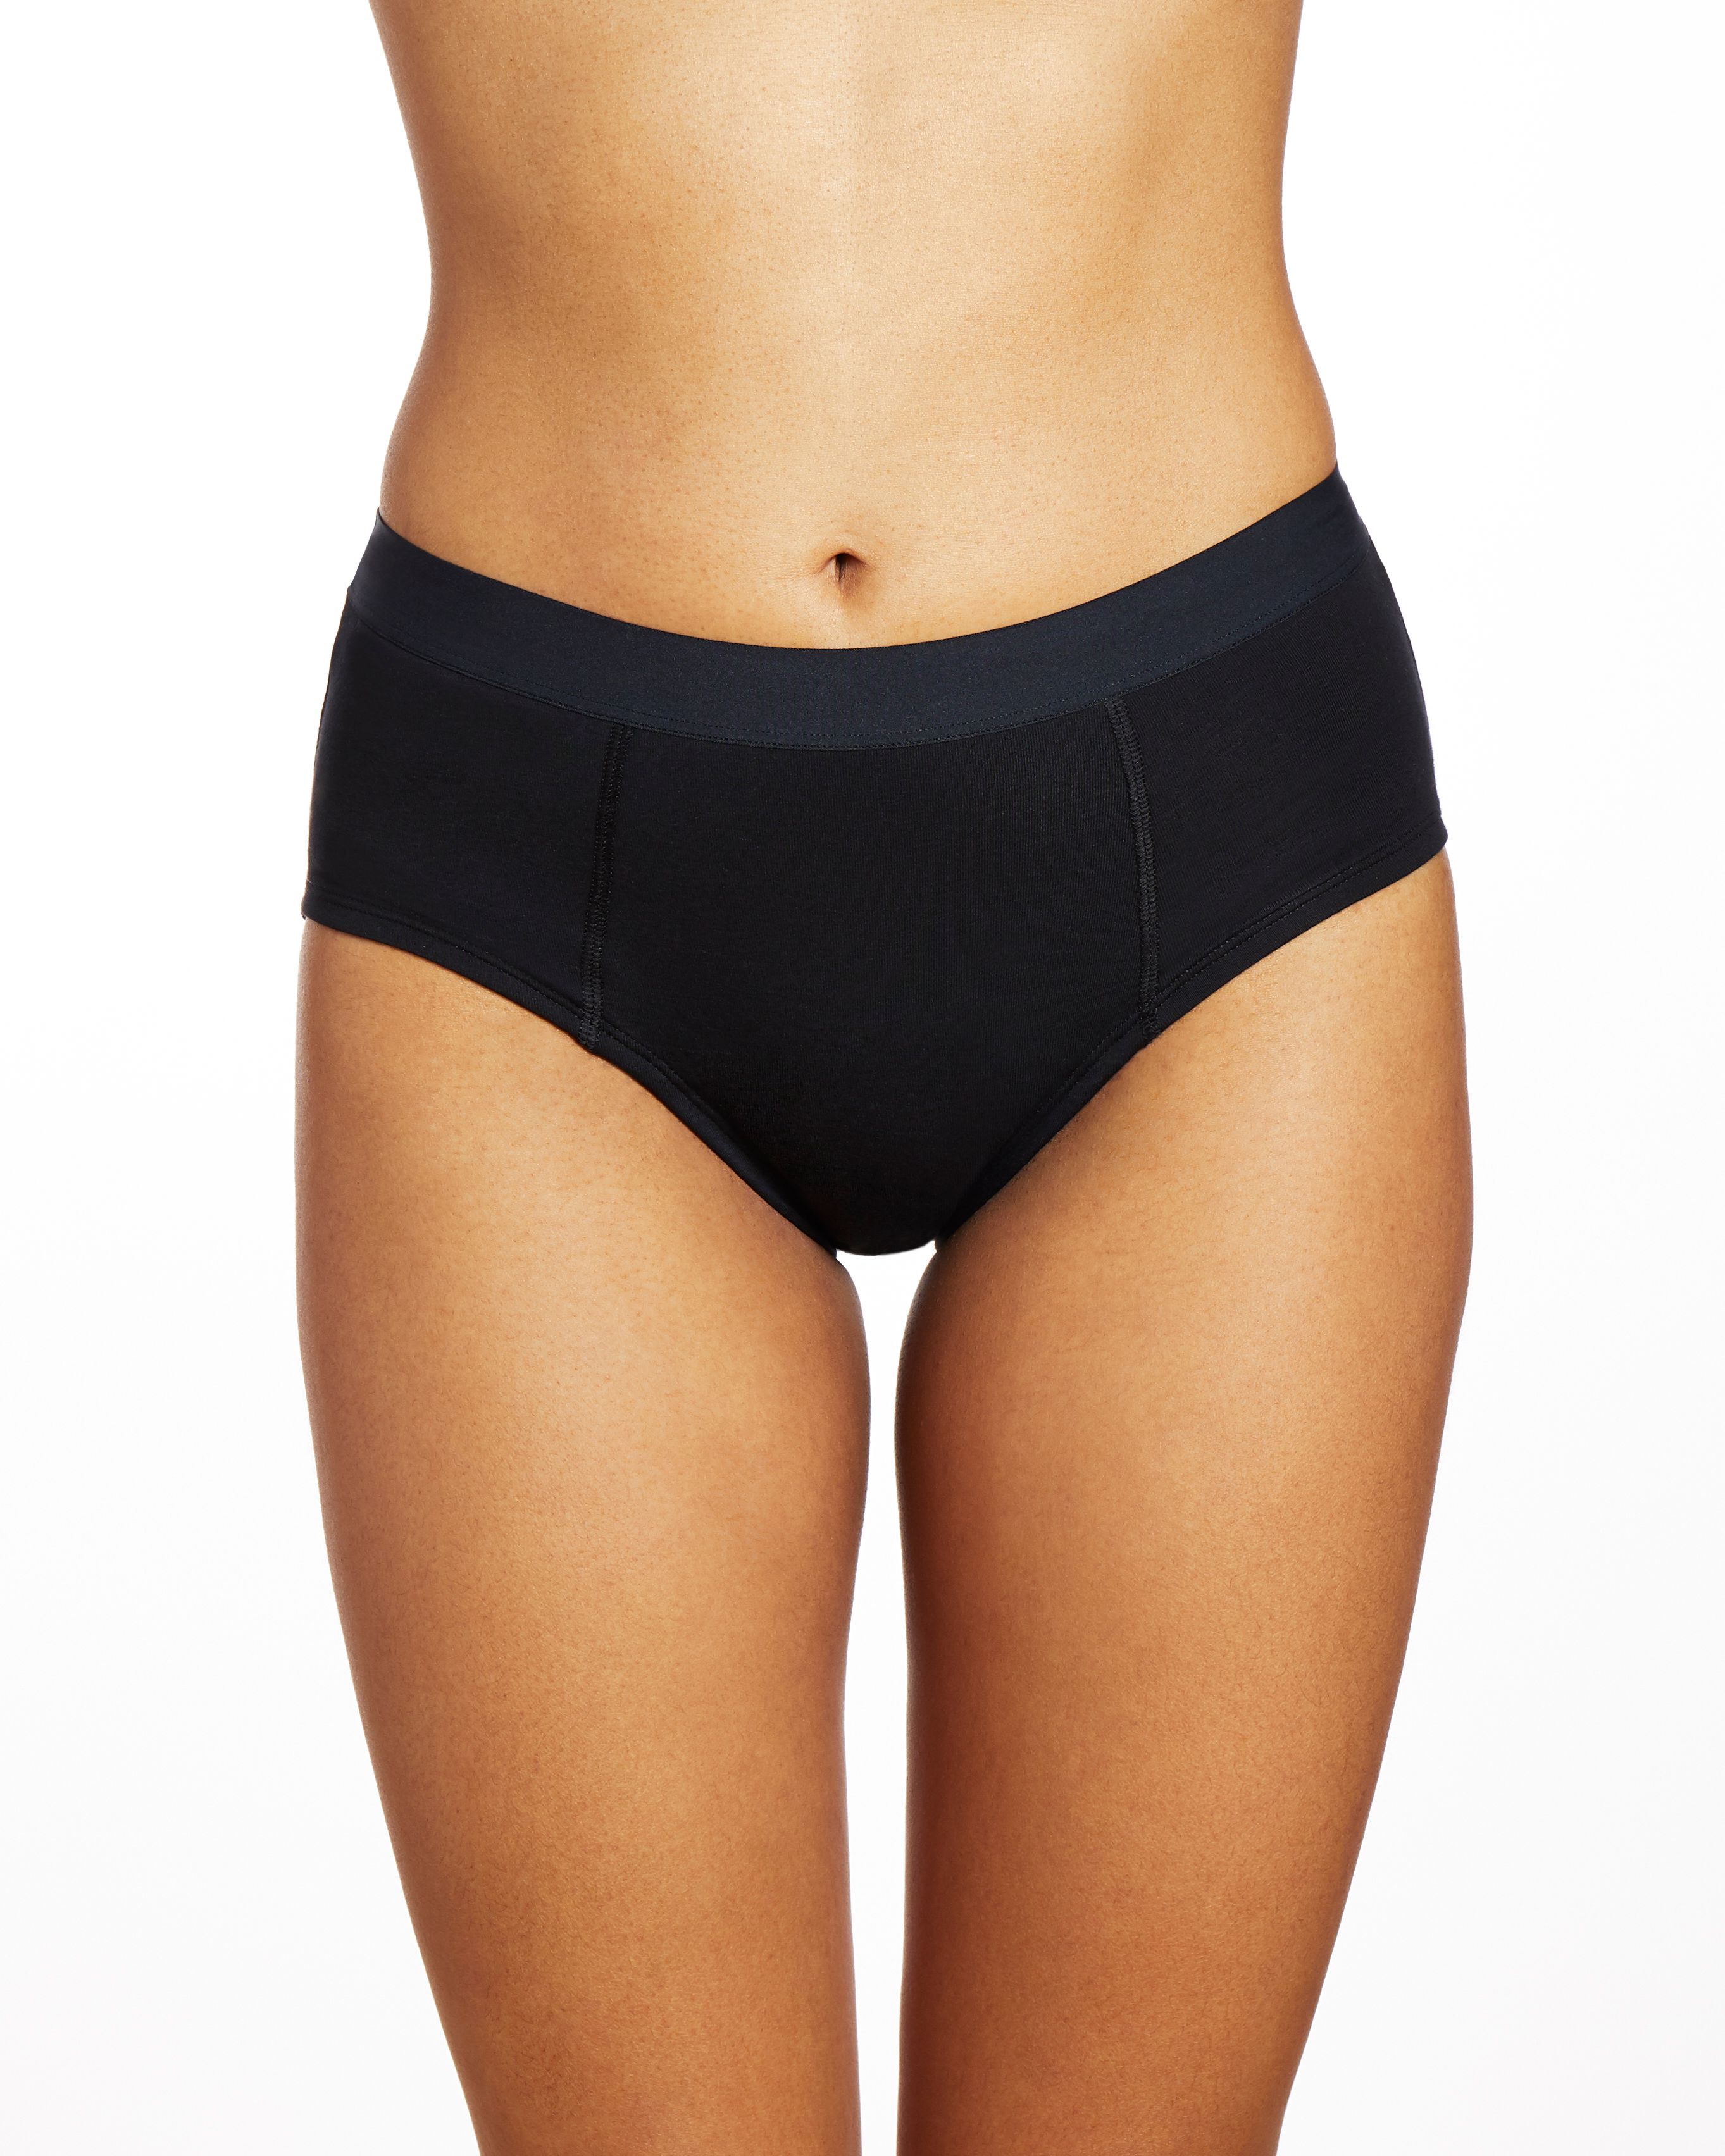 Thinx For All Women's Super Absorbency Cotton Brief Period